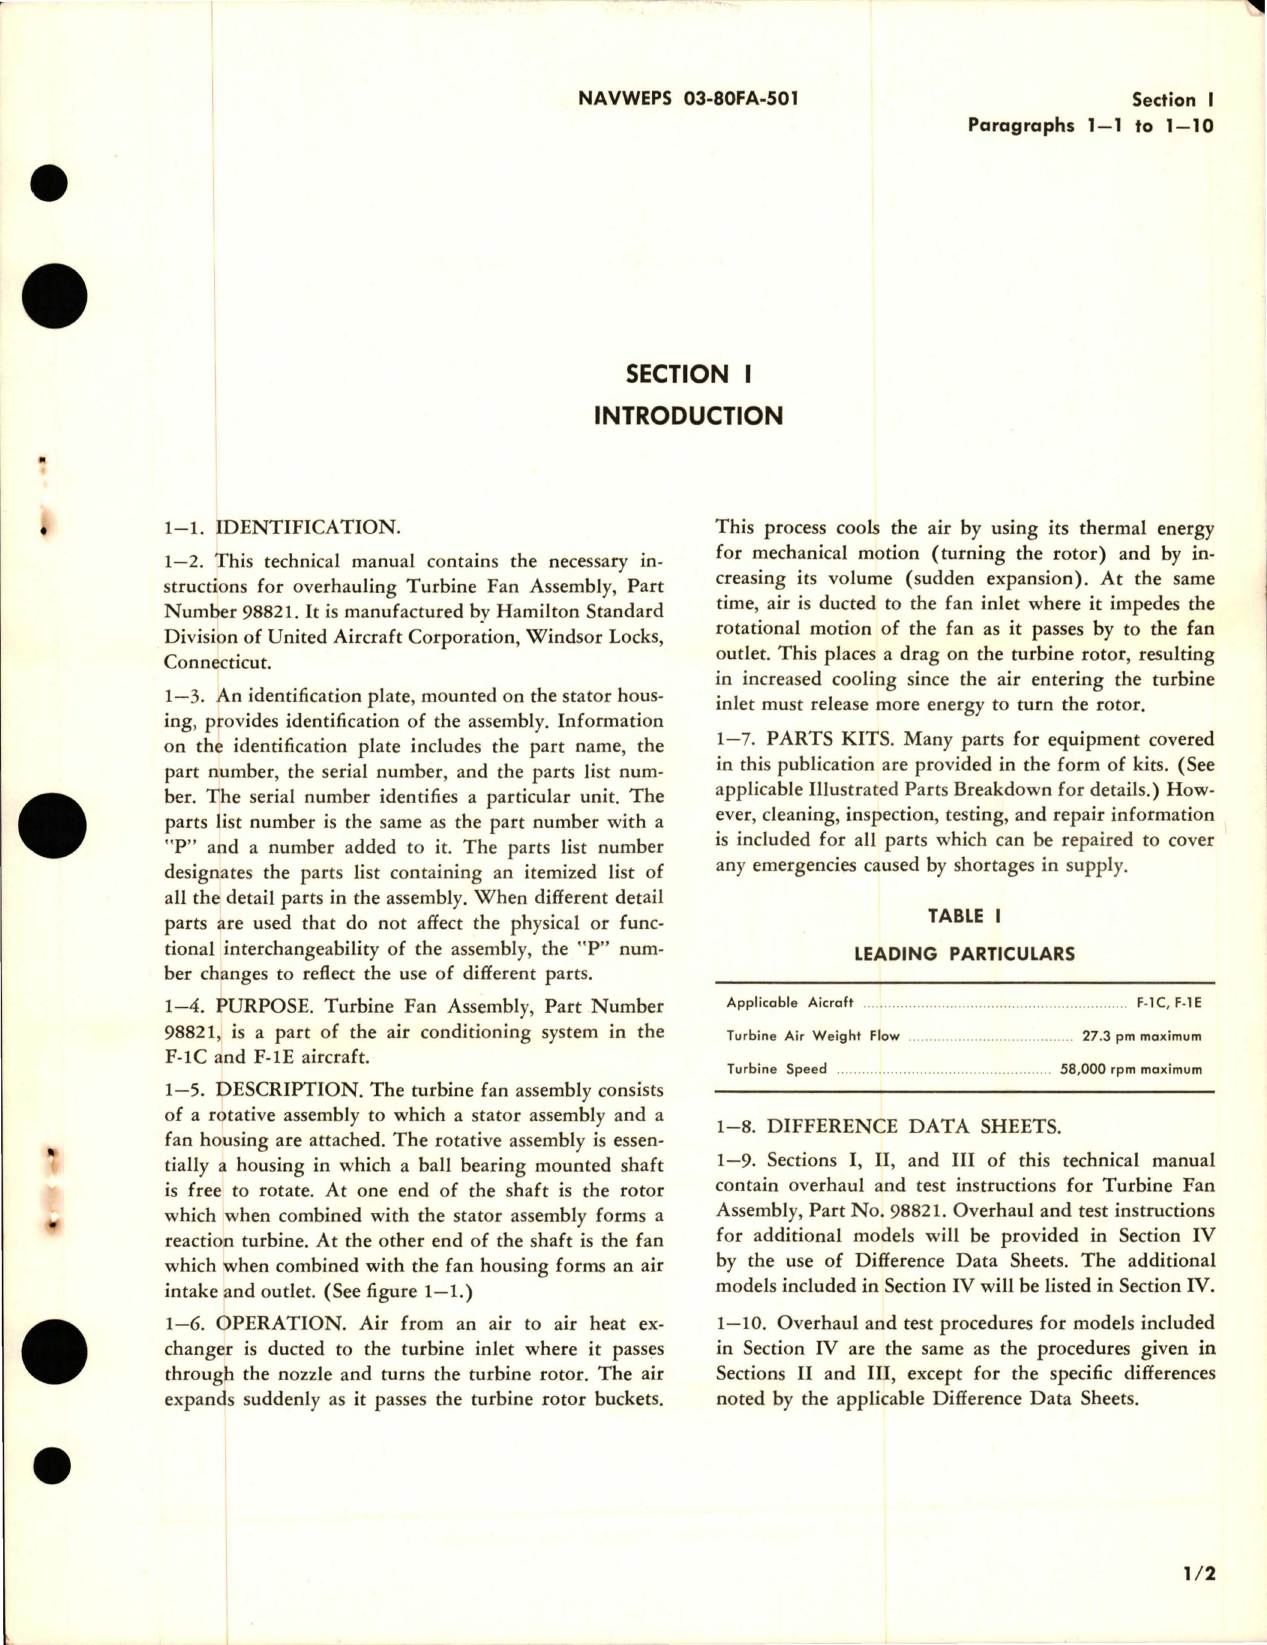 Sample page 5 from AirCorps Library document: Overhaul Instructions for Turbine Fan Assembly - Part 98821